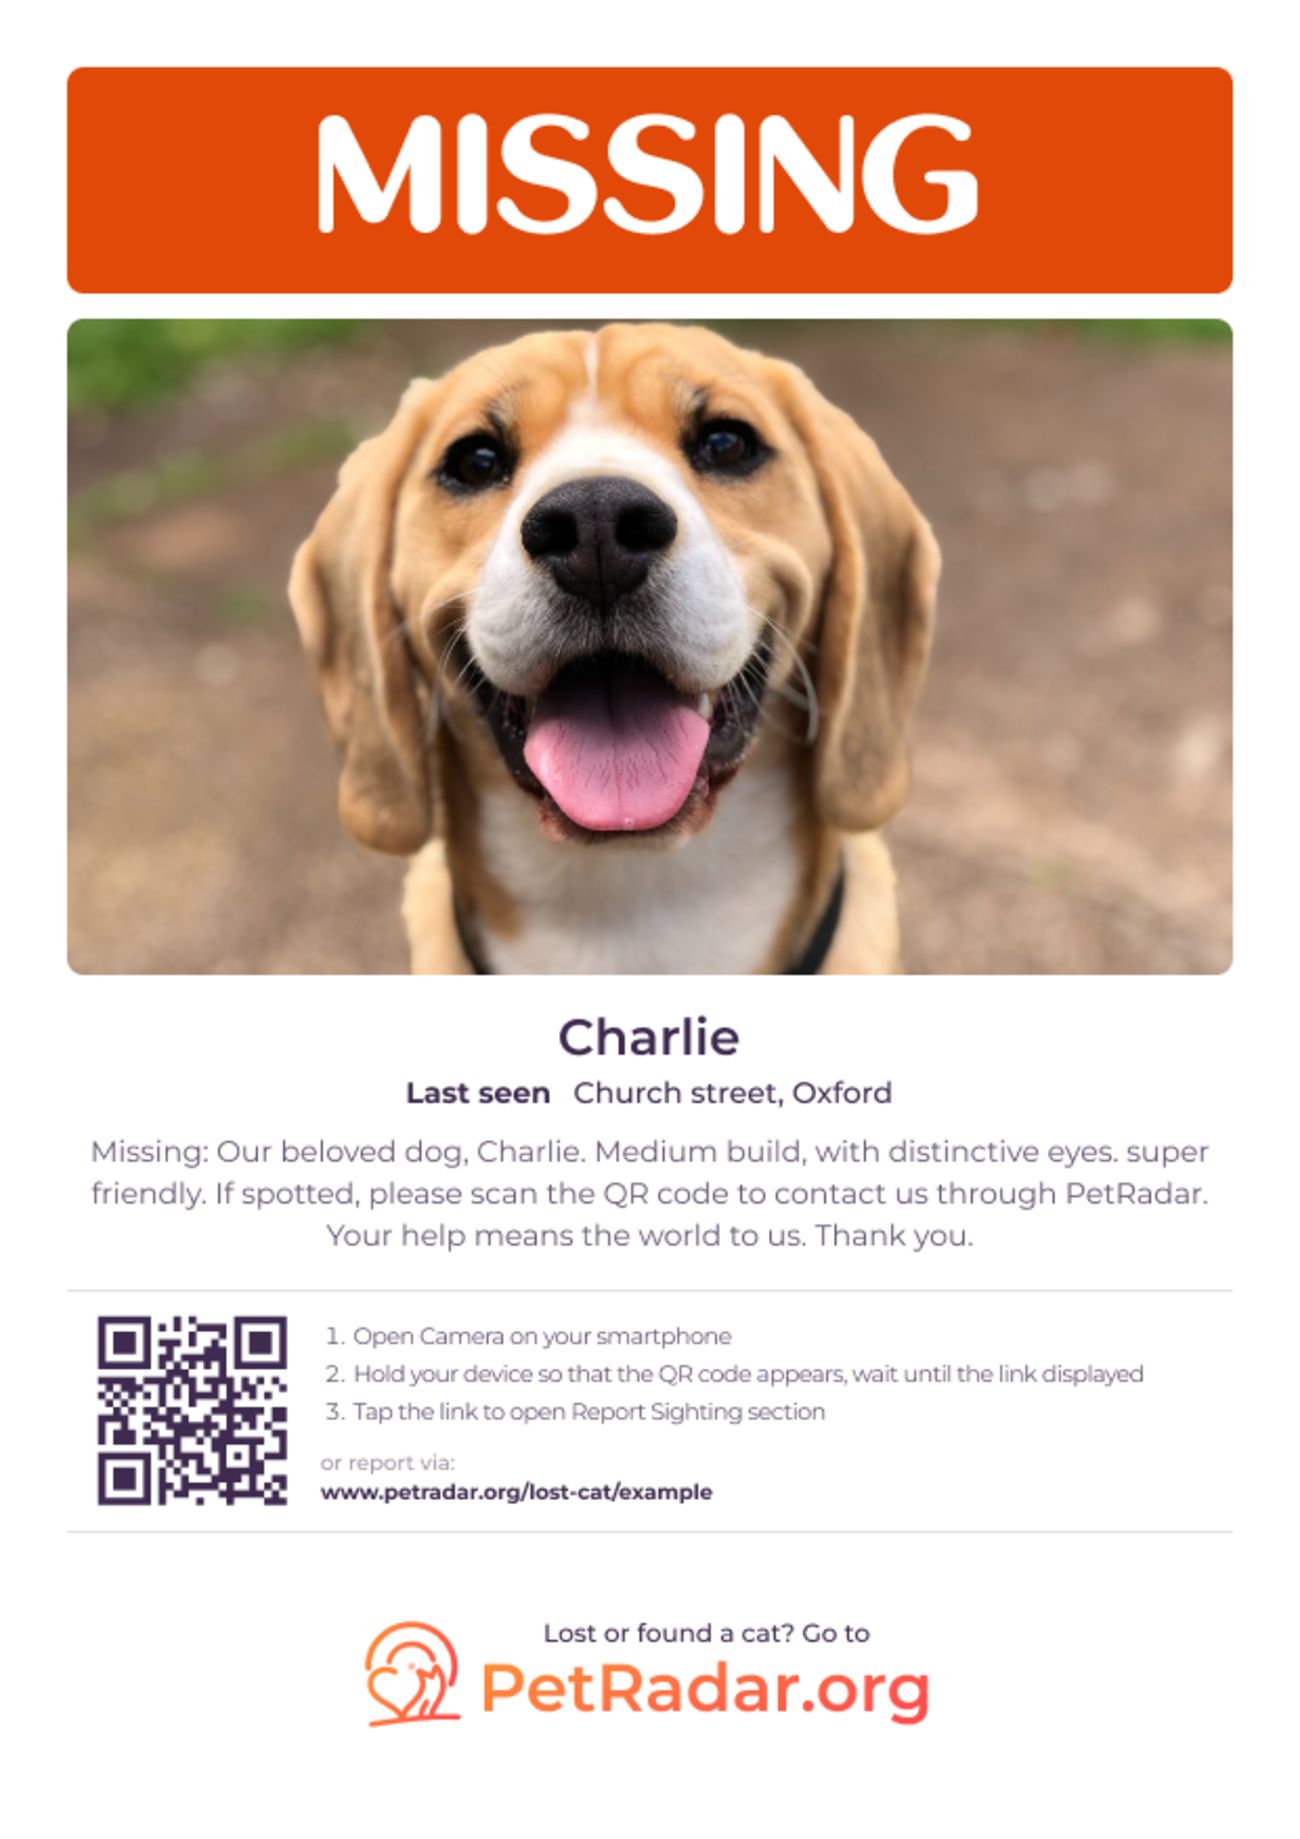 PetRadar's free downloadable and printable missing dog poster